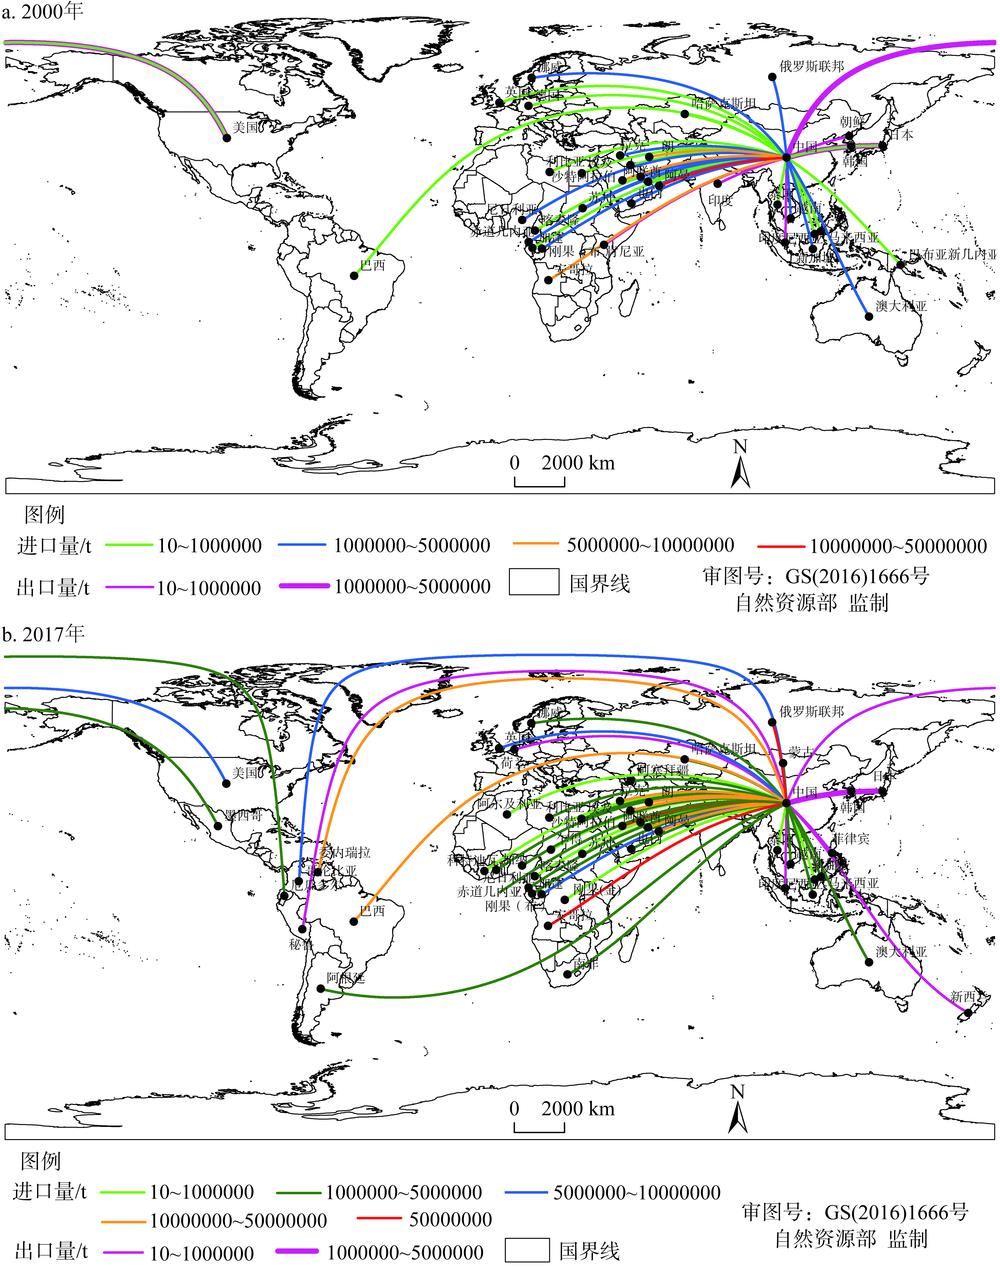 Spatial pattern of crude oil flows between China and other countries